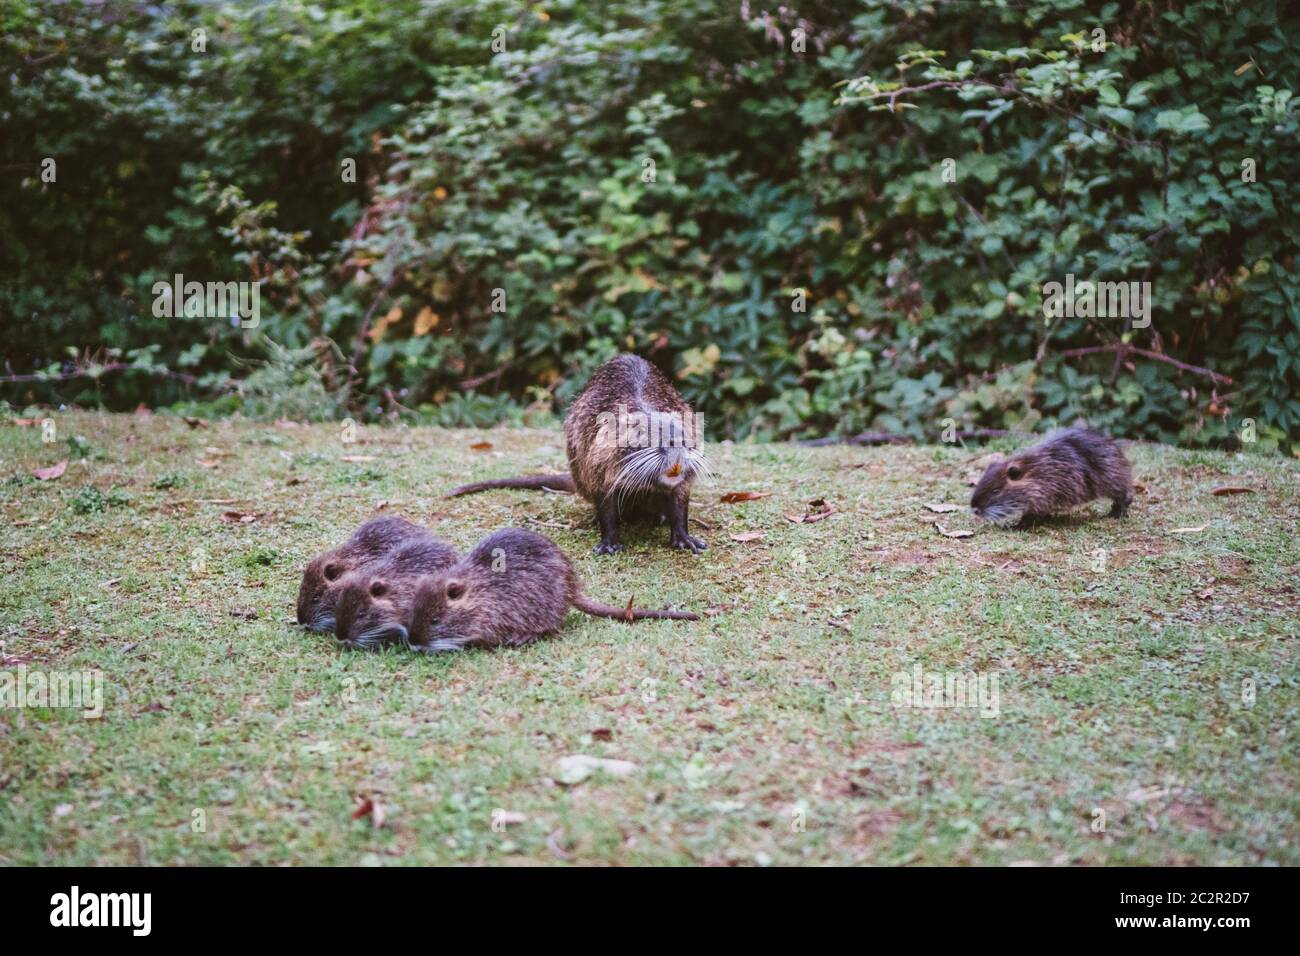 Animal families in natural environment. Wild baby coypu Myocastor Coypus following his mother. Coypu family with babies resting. Stock Photo